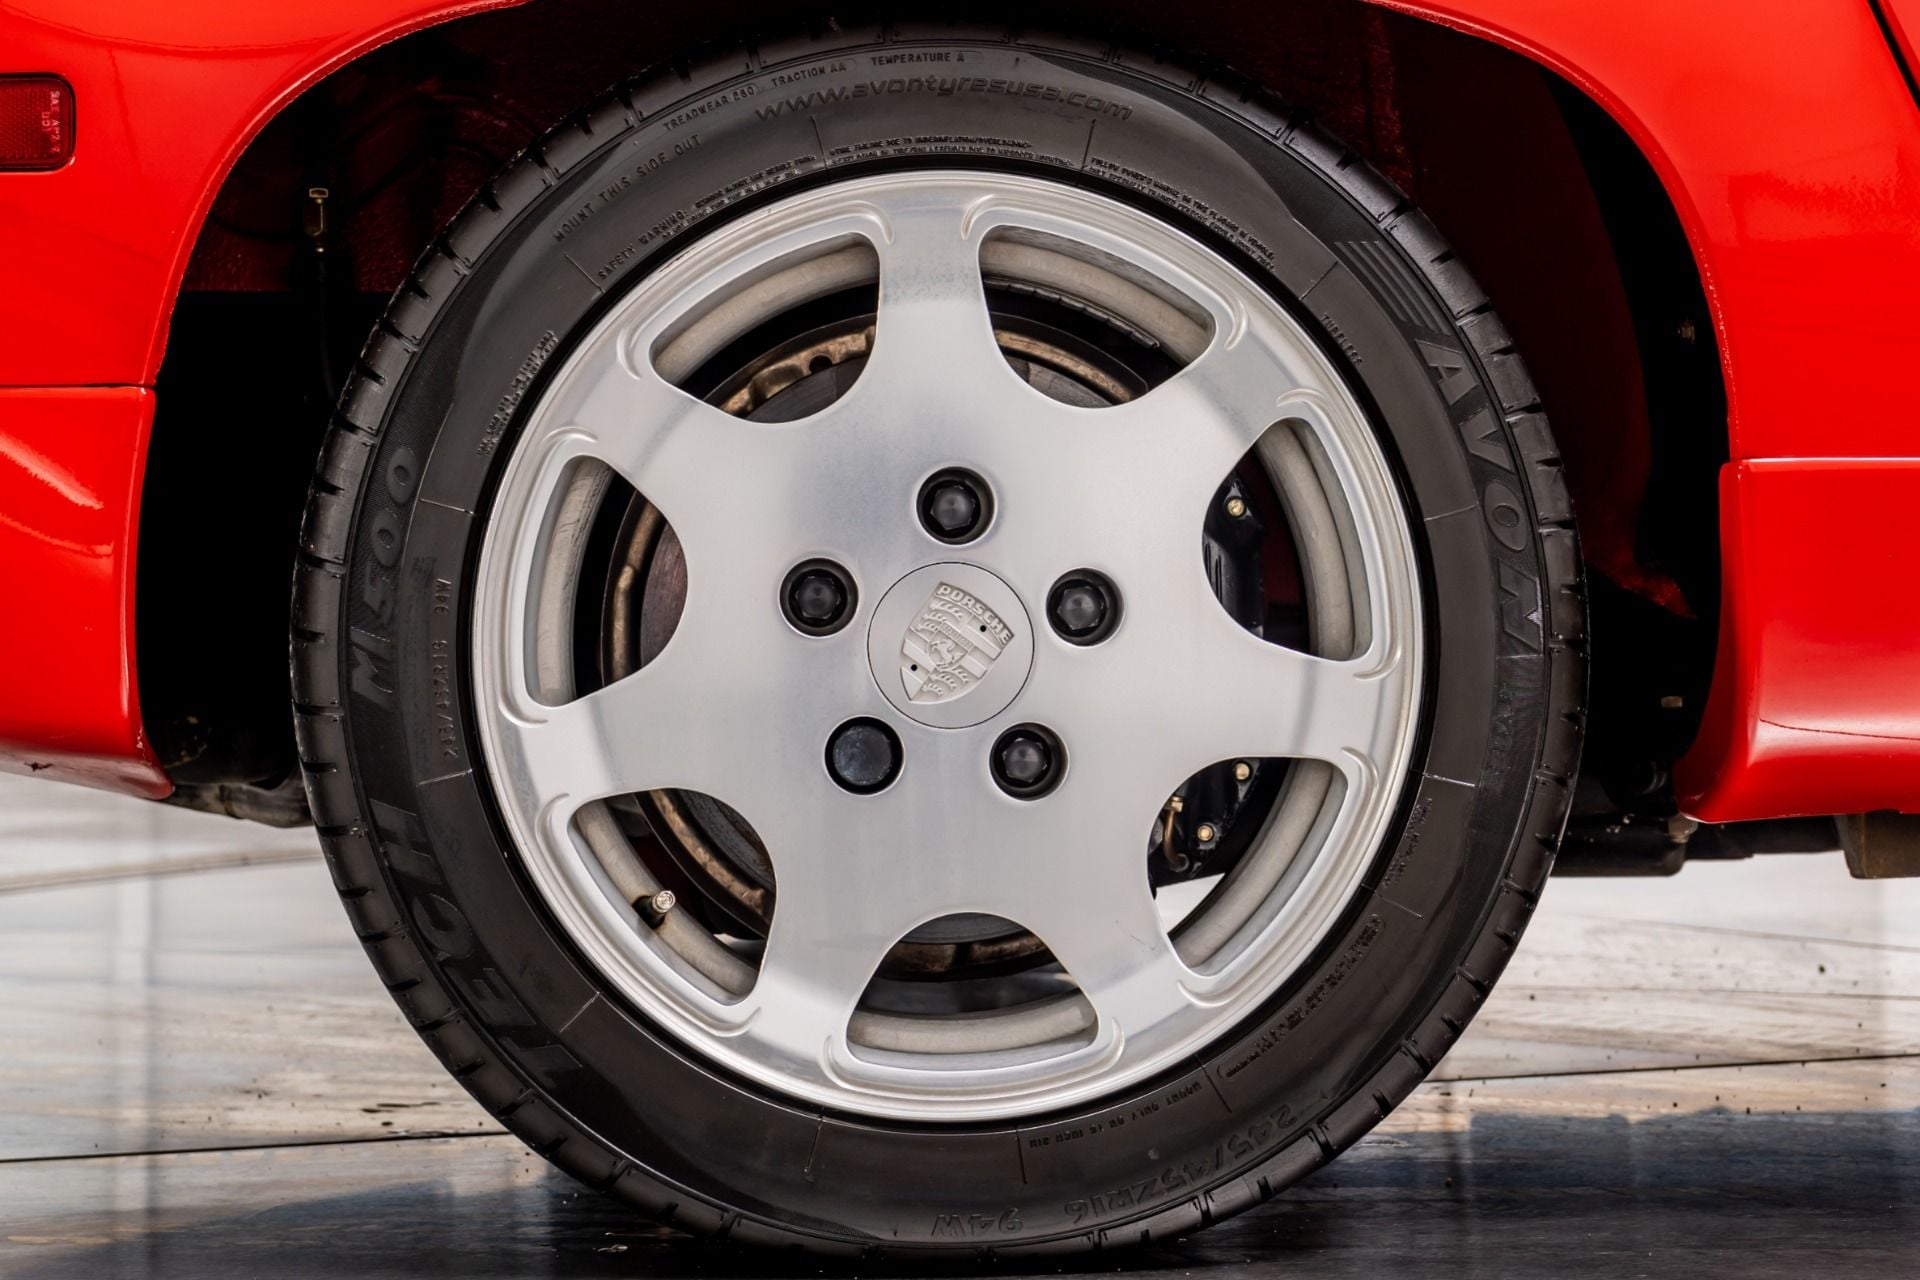 Wheels and Tires/Axles - WTB 928/951 Lightweight Club Sport Wheels (16" Forged Alloys) - New or Used - 1989 Porsche 928 - Alexandria, VA 22308, United States